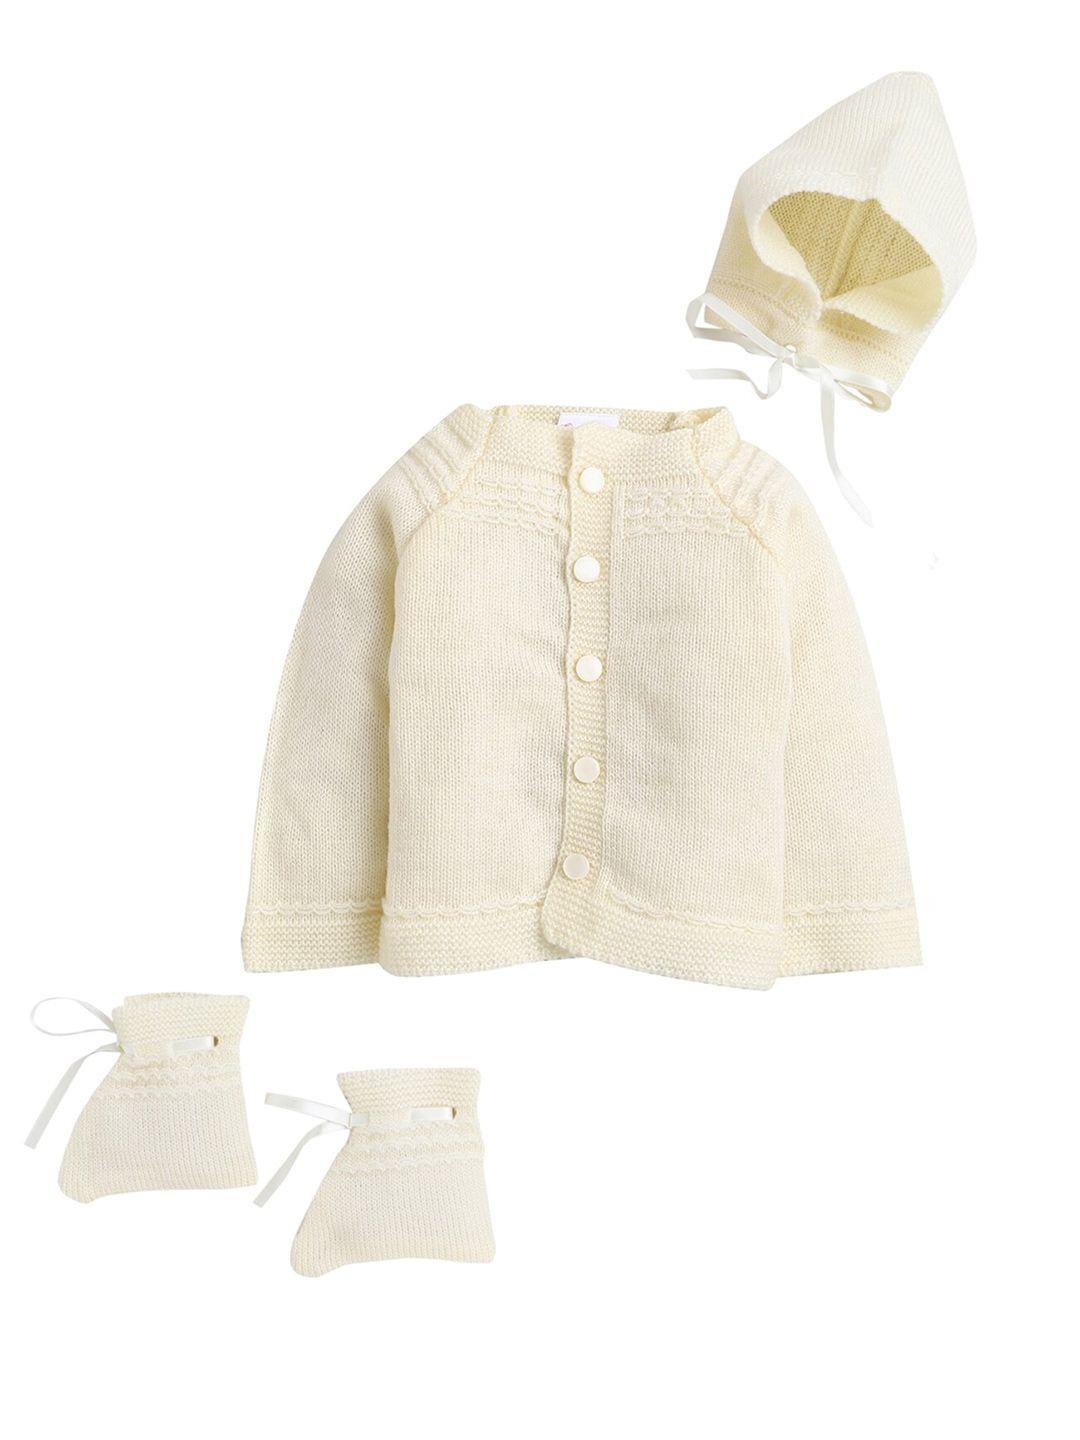 little angels unisex kids cream-coloured cable knit cardigan matching cap and socks